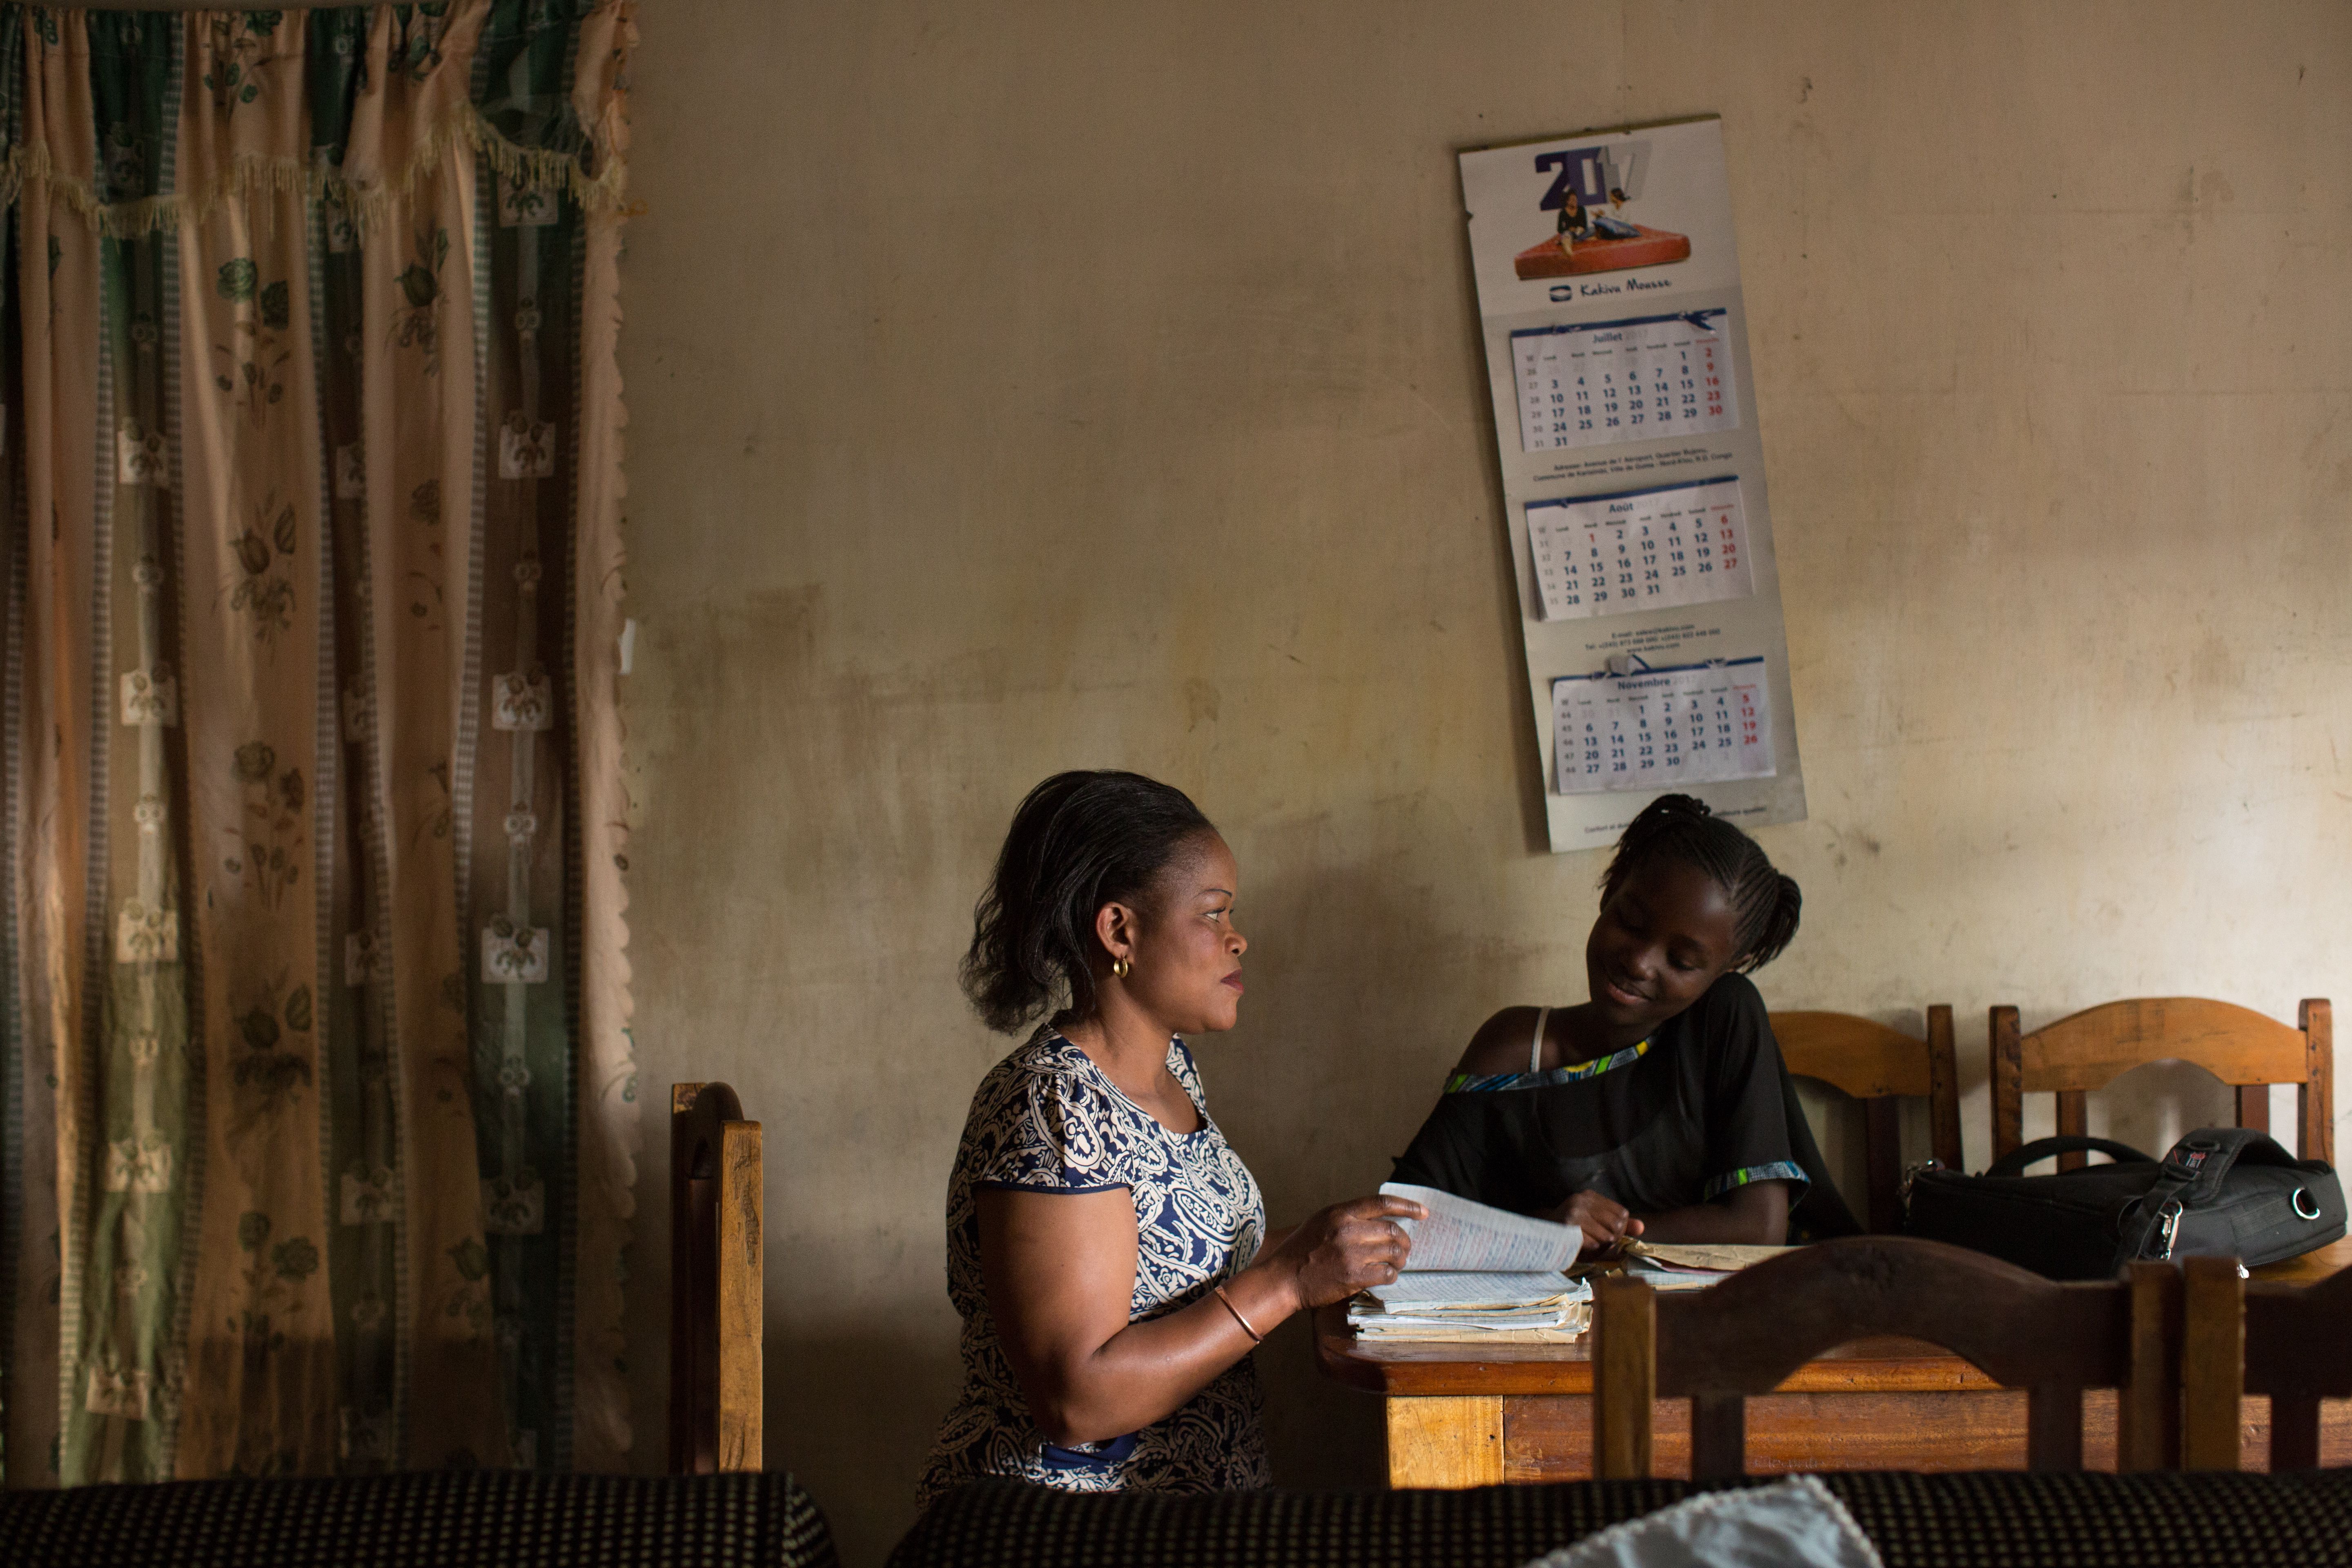 FARDC captain Fanni Katora, 34, looks over the school work of her daughter Syntiche, 10, after work at their home in Goma, D.R. Congo, November 29, 2017. Image by Allison Shelley. Democratic Republic of Congo, 2017. 